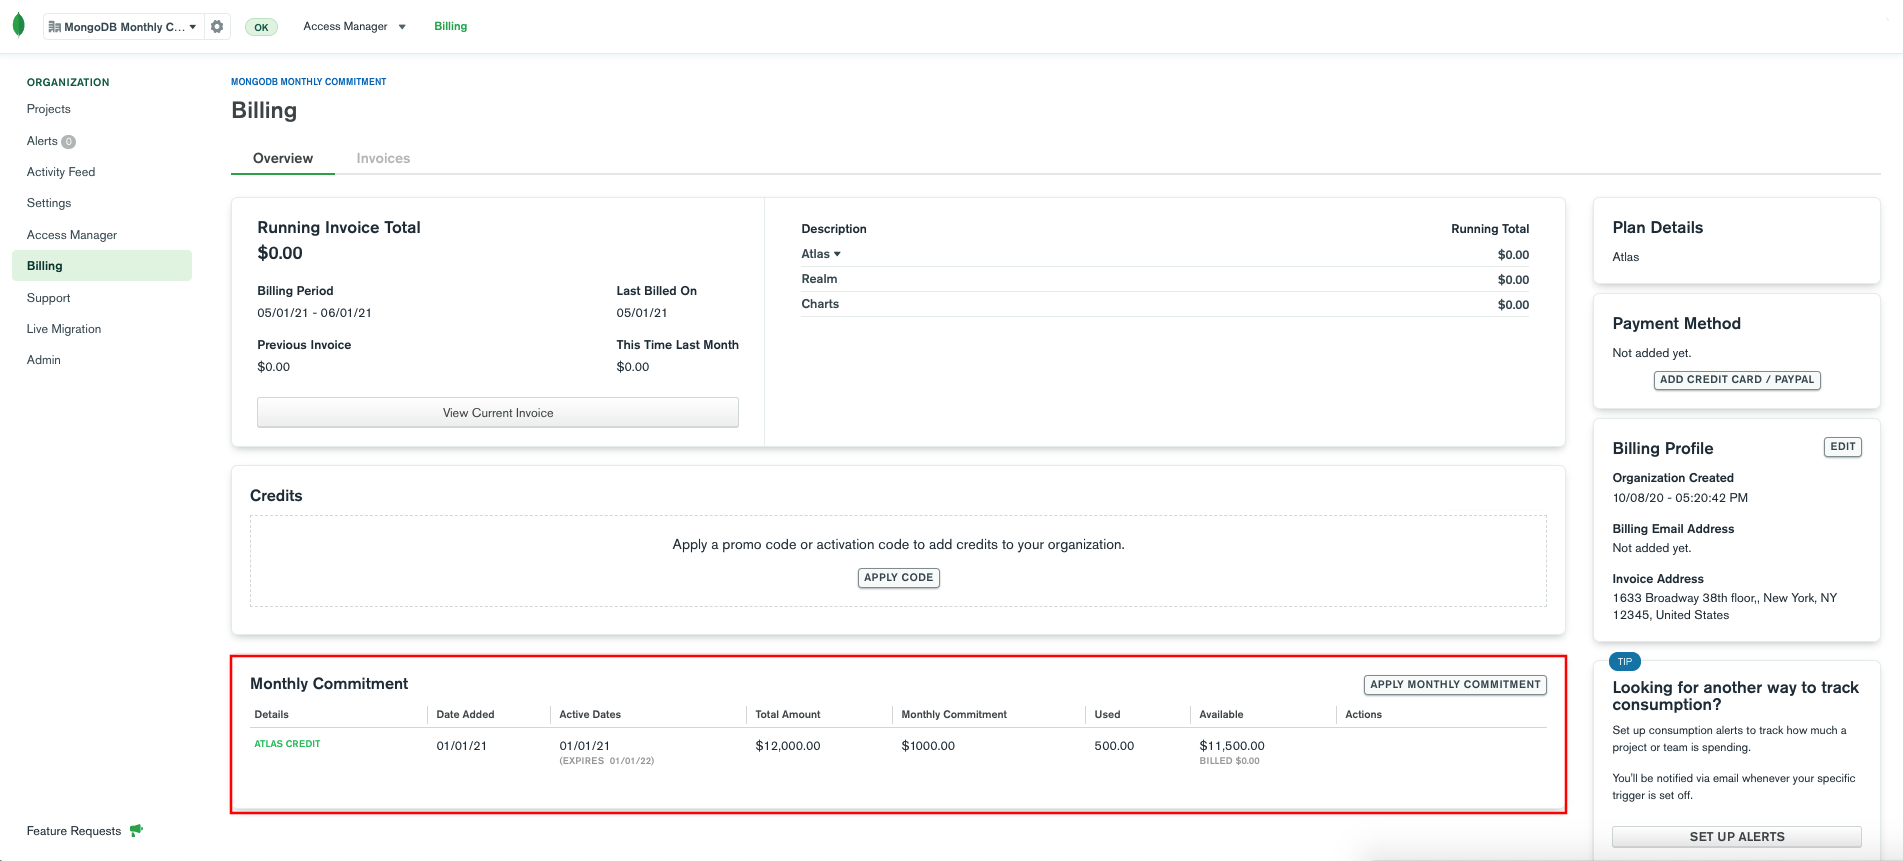 You can view your monthly commitment information at the bottom of your organization's Billing Overview.